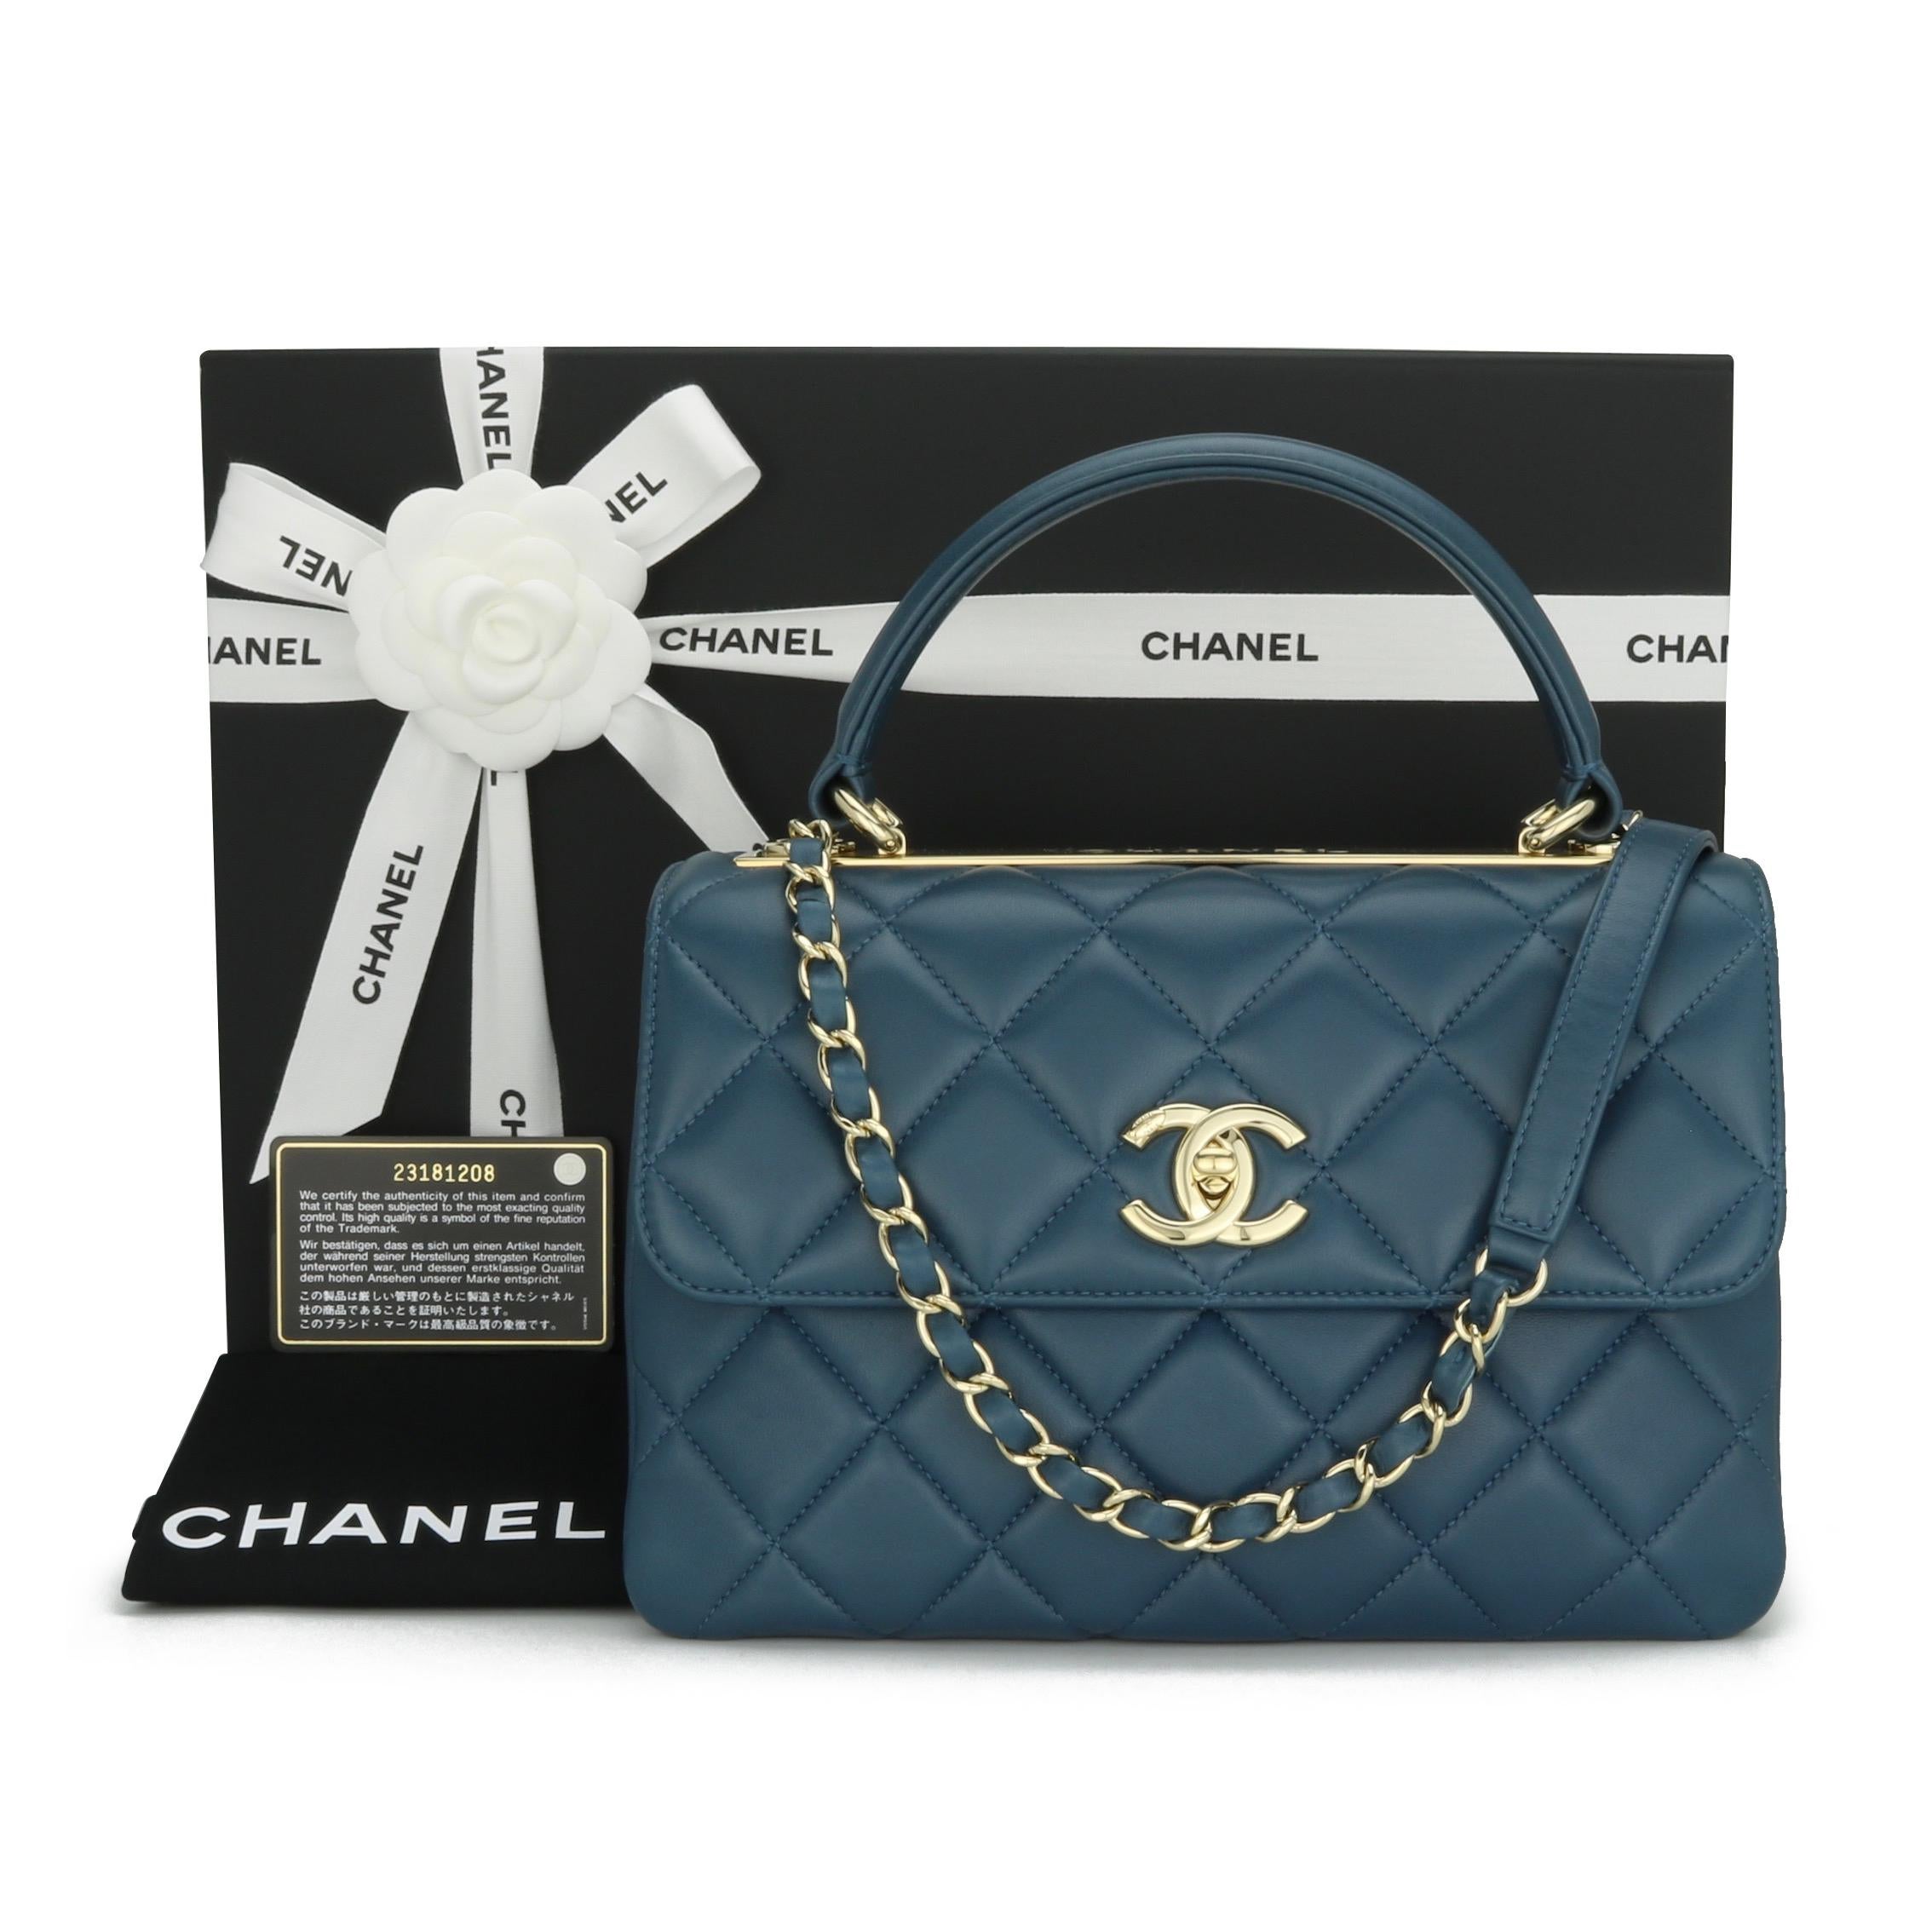 CHANEL Trendy CC Top Handle Bag Small Blue Lambskin with Light Gold-Tone Hardware 2017.

This stunning bag is in very good condition, the bag still holds its original shape, and the hardware is still very shiny.

This top handle bag is simply